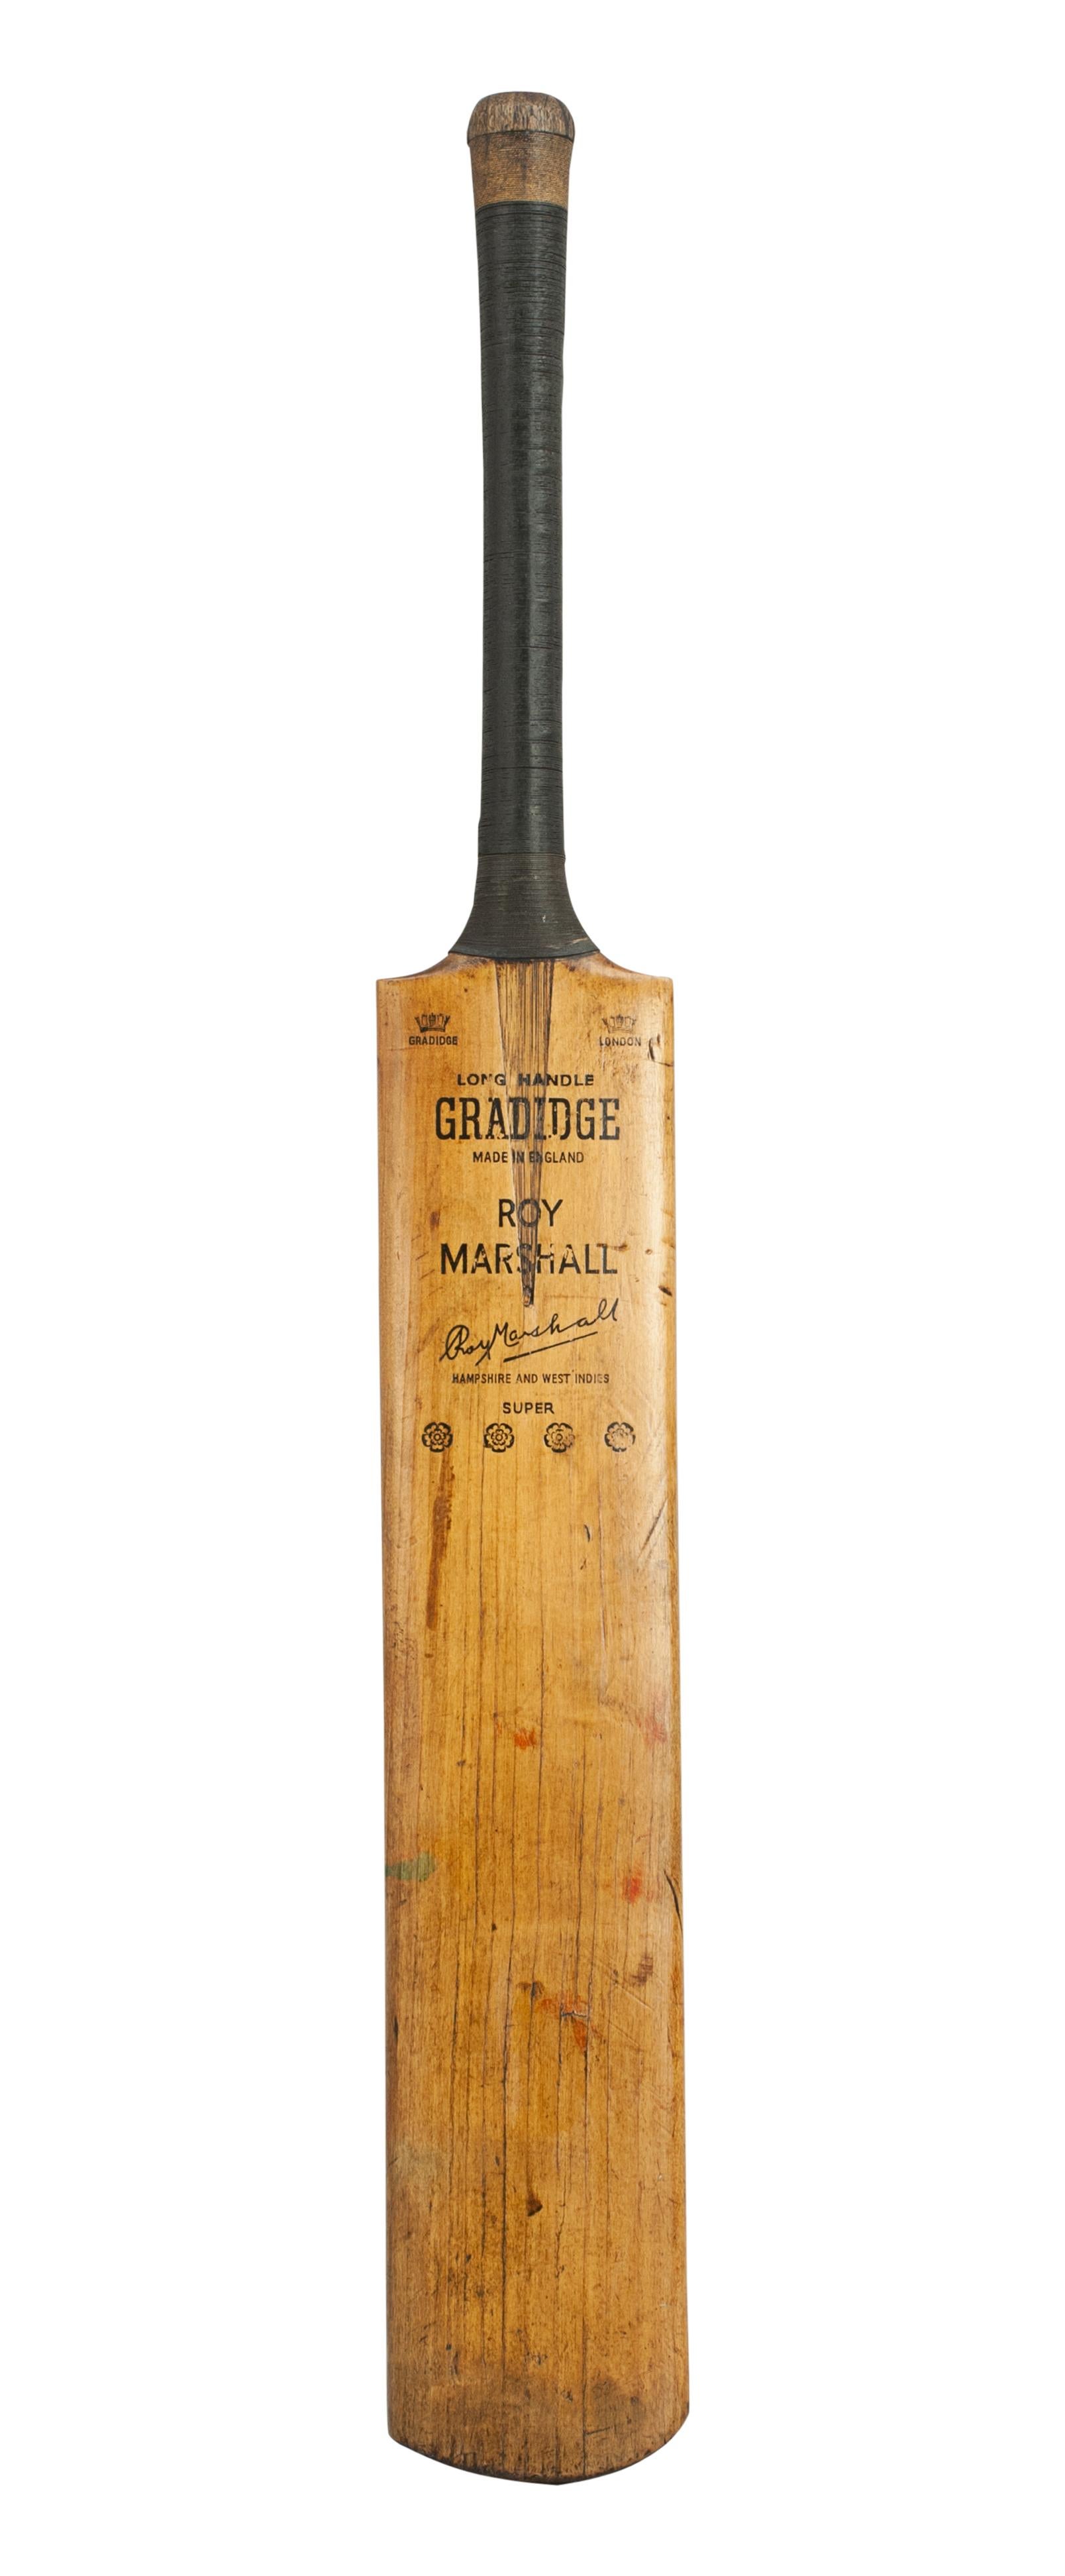 A good willow cricket bat by Gradidge of London. The 'Roy Marshall' autograph bat is in good condition with a lovely patina. The blade is embossed with a crown on each shoulder, the words 'Gradidge' under one, 'London' under the other. Also 'Long